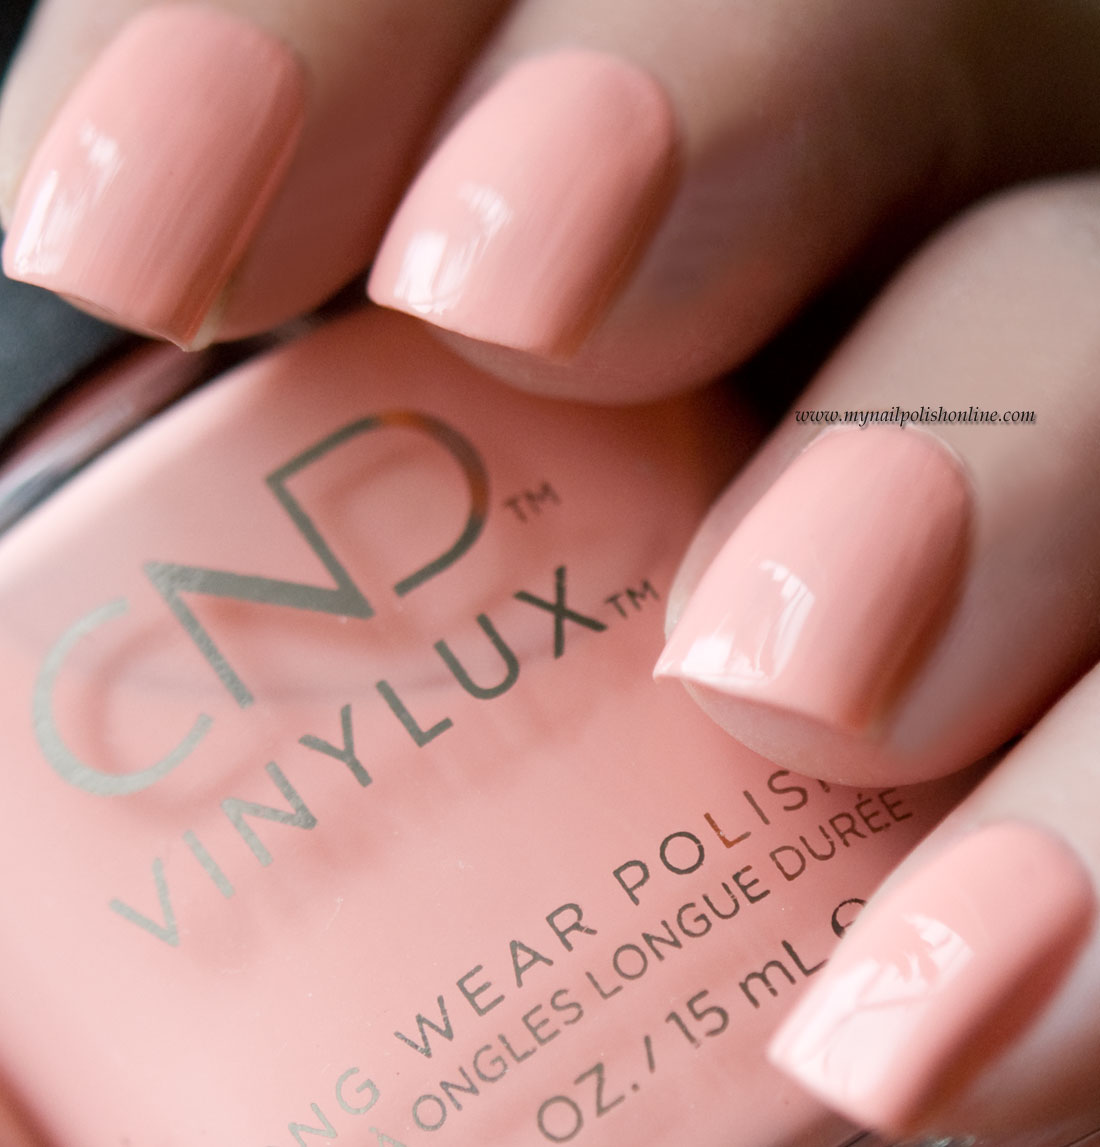 CND Vinylux Forever Yours - My Nail Polish Online